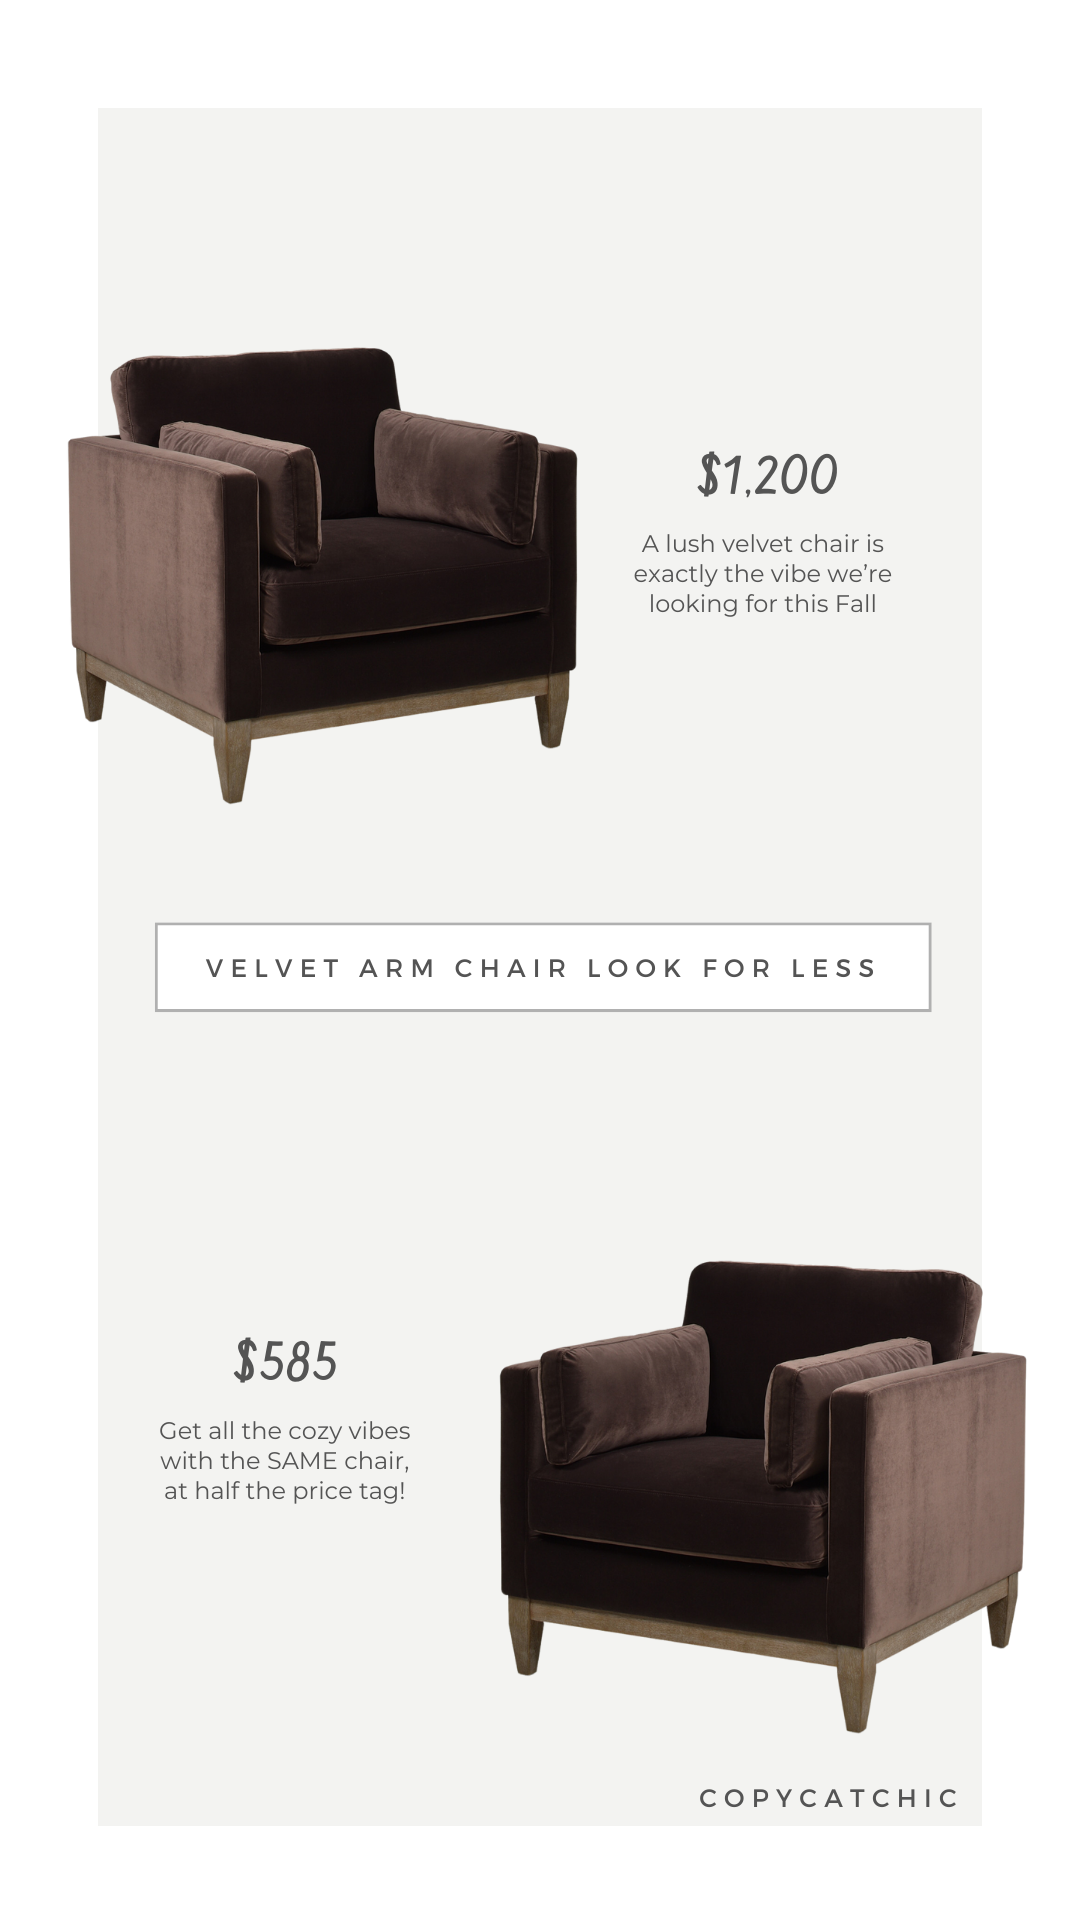 Daily Find: Rue La La Jennifer Taylor Home Modern Farmhouse Arm Chair vs Jennifer Taylor Home Knox Arm Chair, brown velvet club chair look for less, copycatchic luxe living for less, budget home decor and design, daily dupes, home trends, sales, budget travel and room inspiration